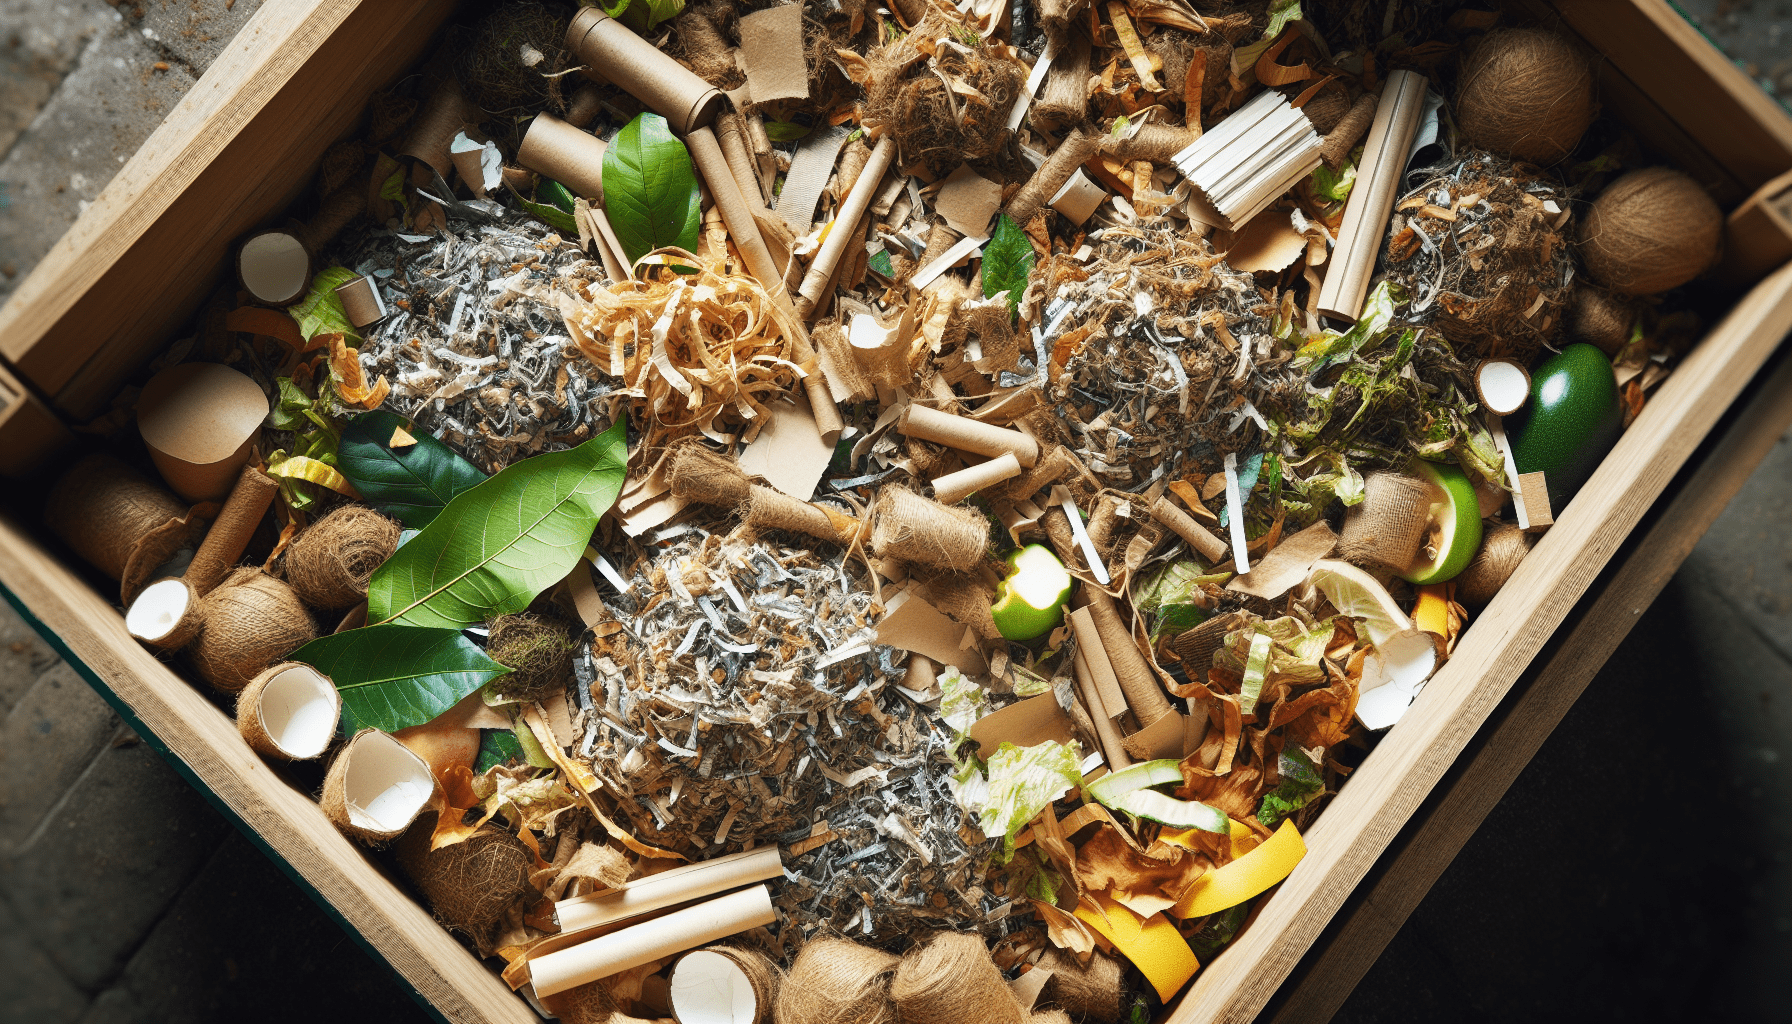 Can I Compost Paper And Cardboard?